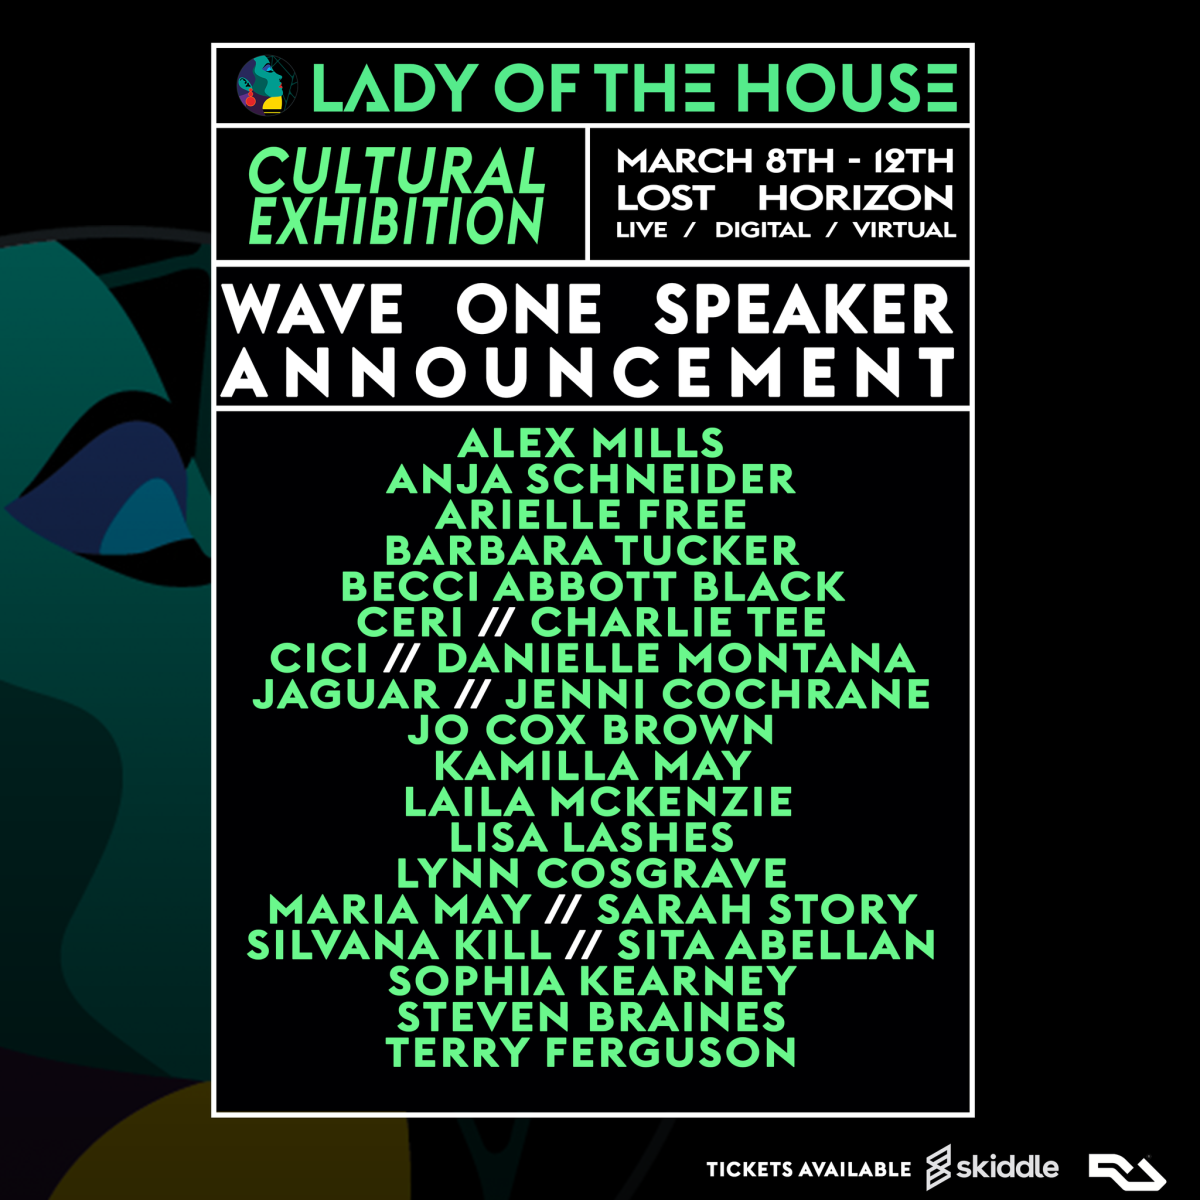 Lady of the House Cultural Exhibition speaker lineup.